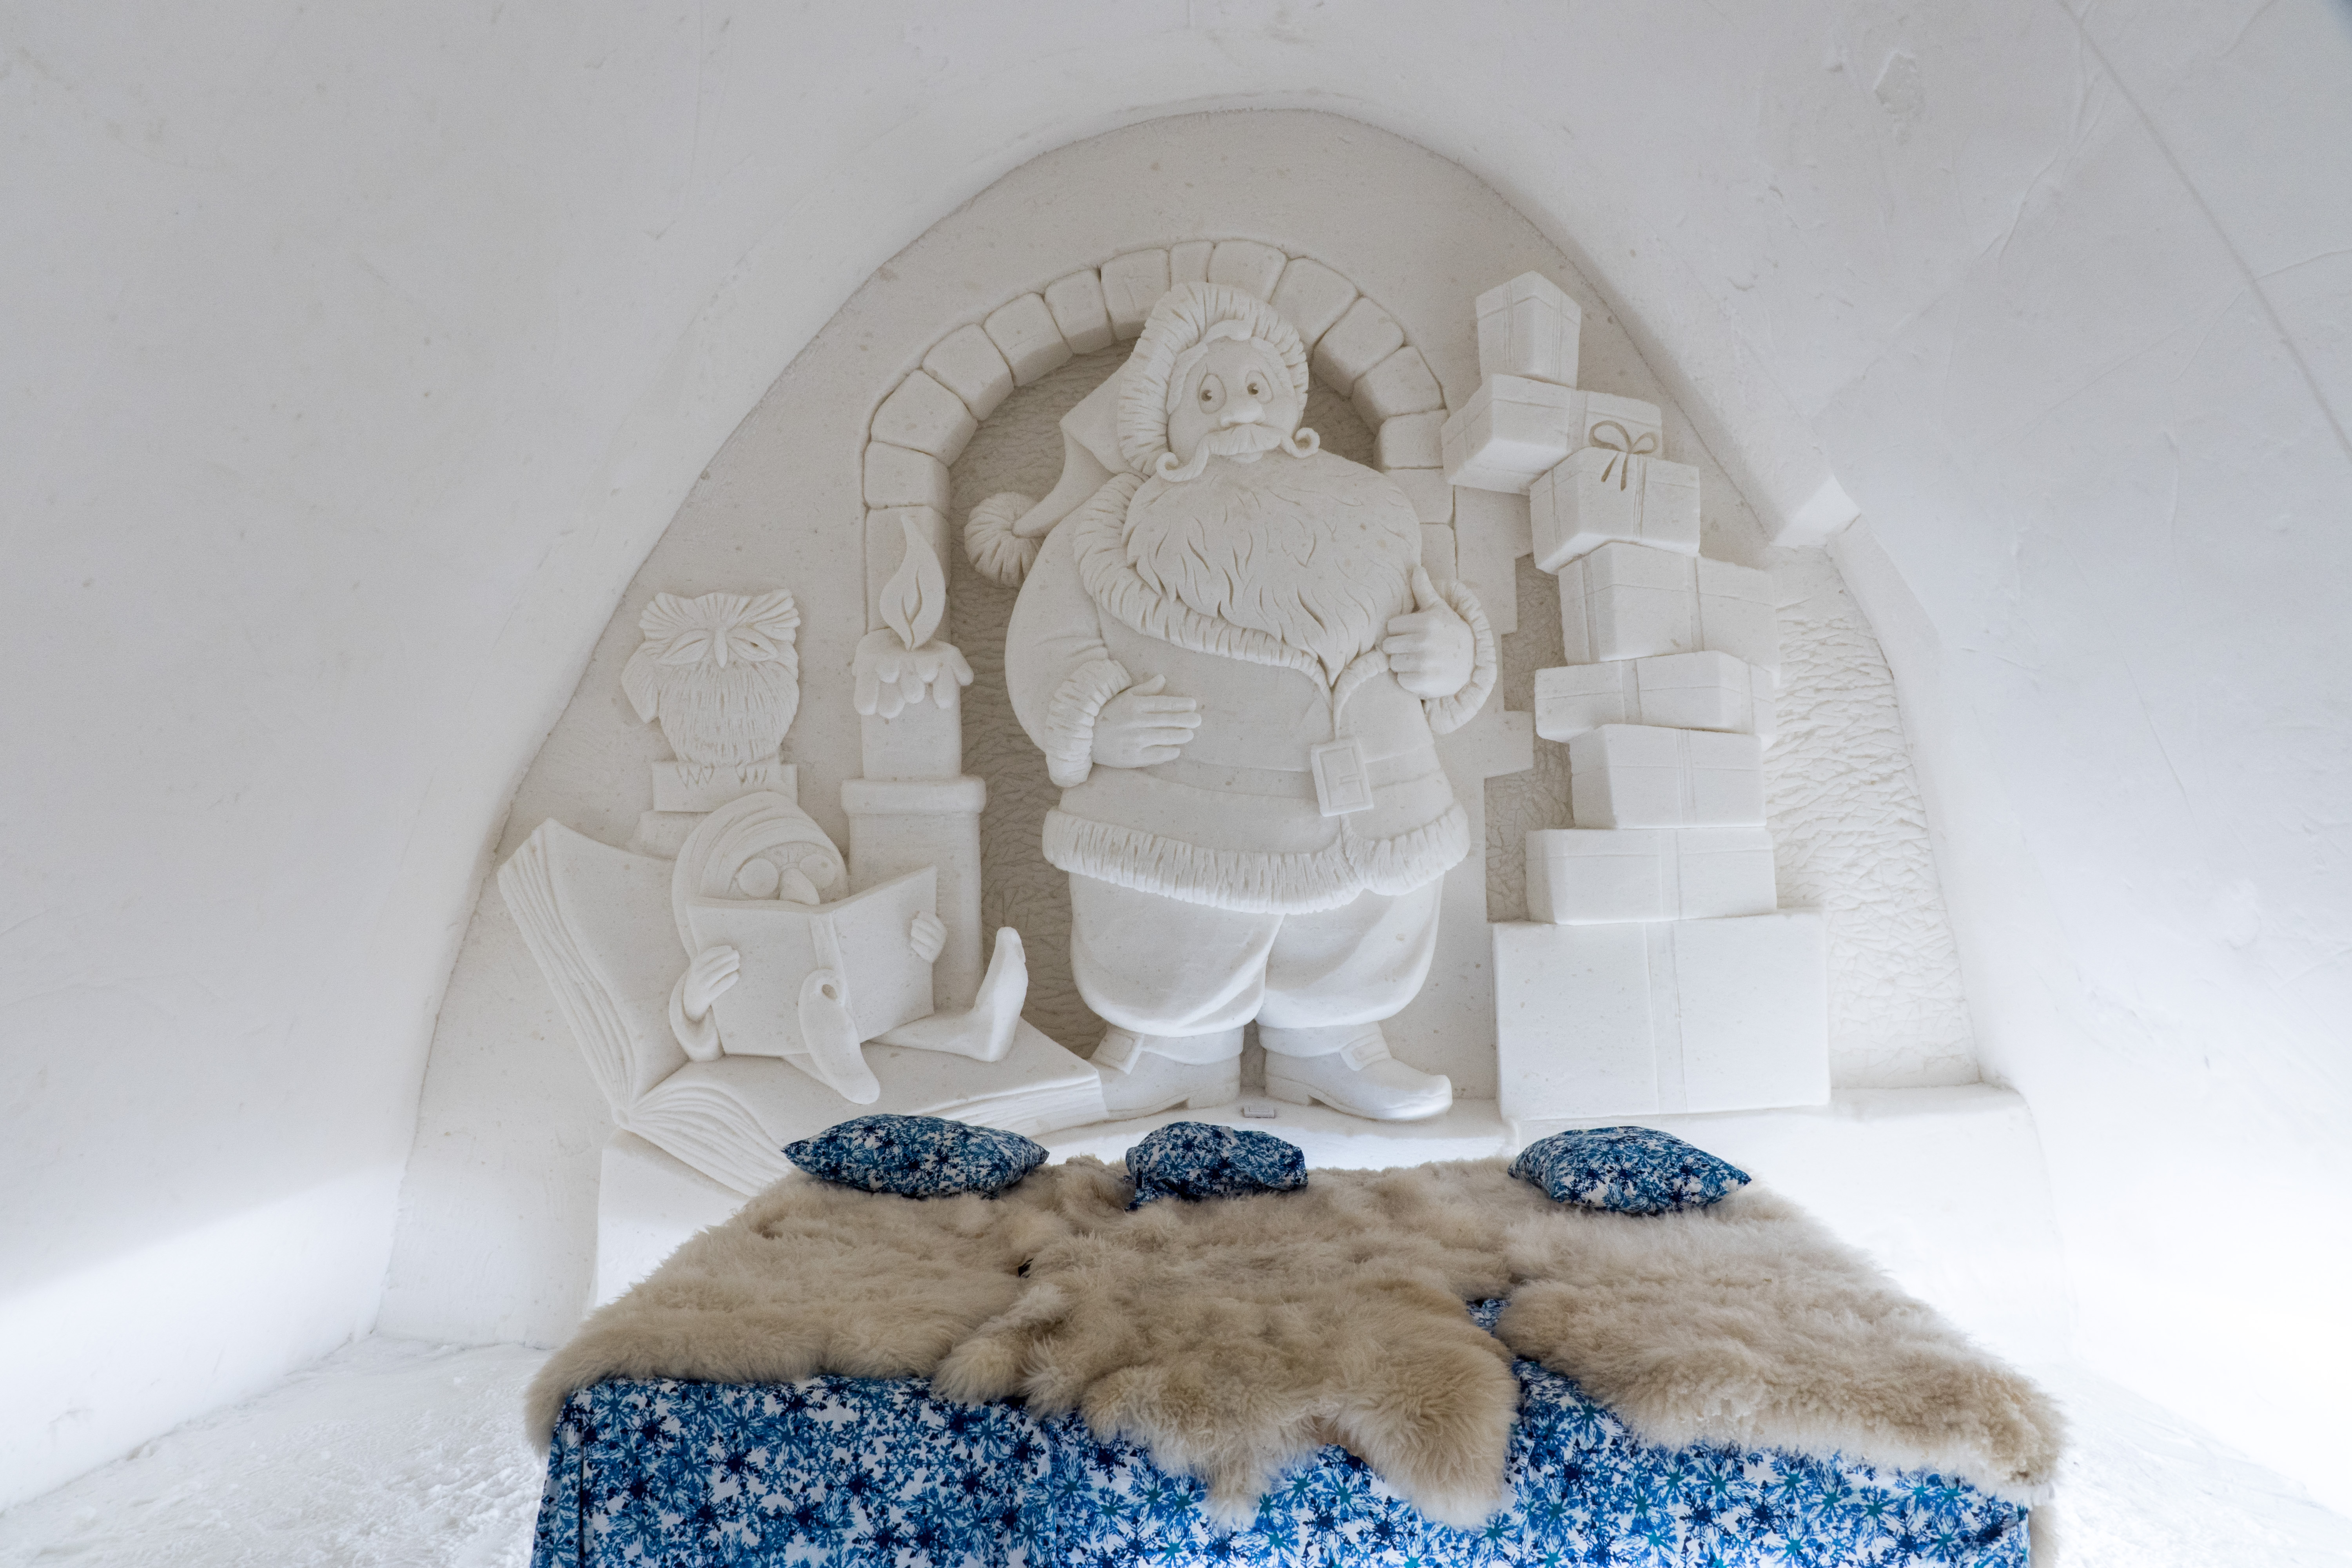 An ice sculpture in an ice hotel